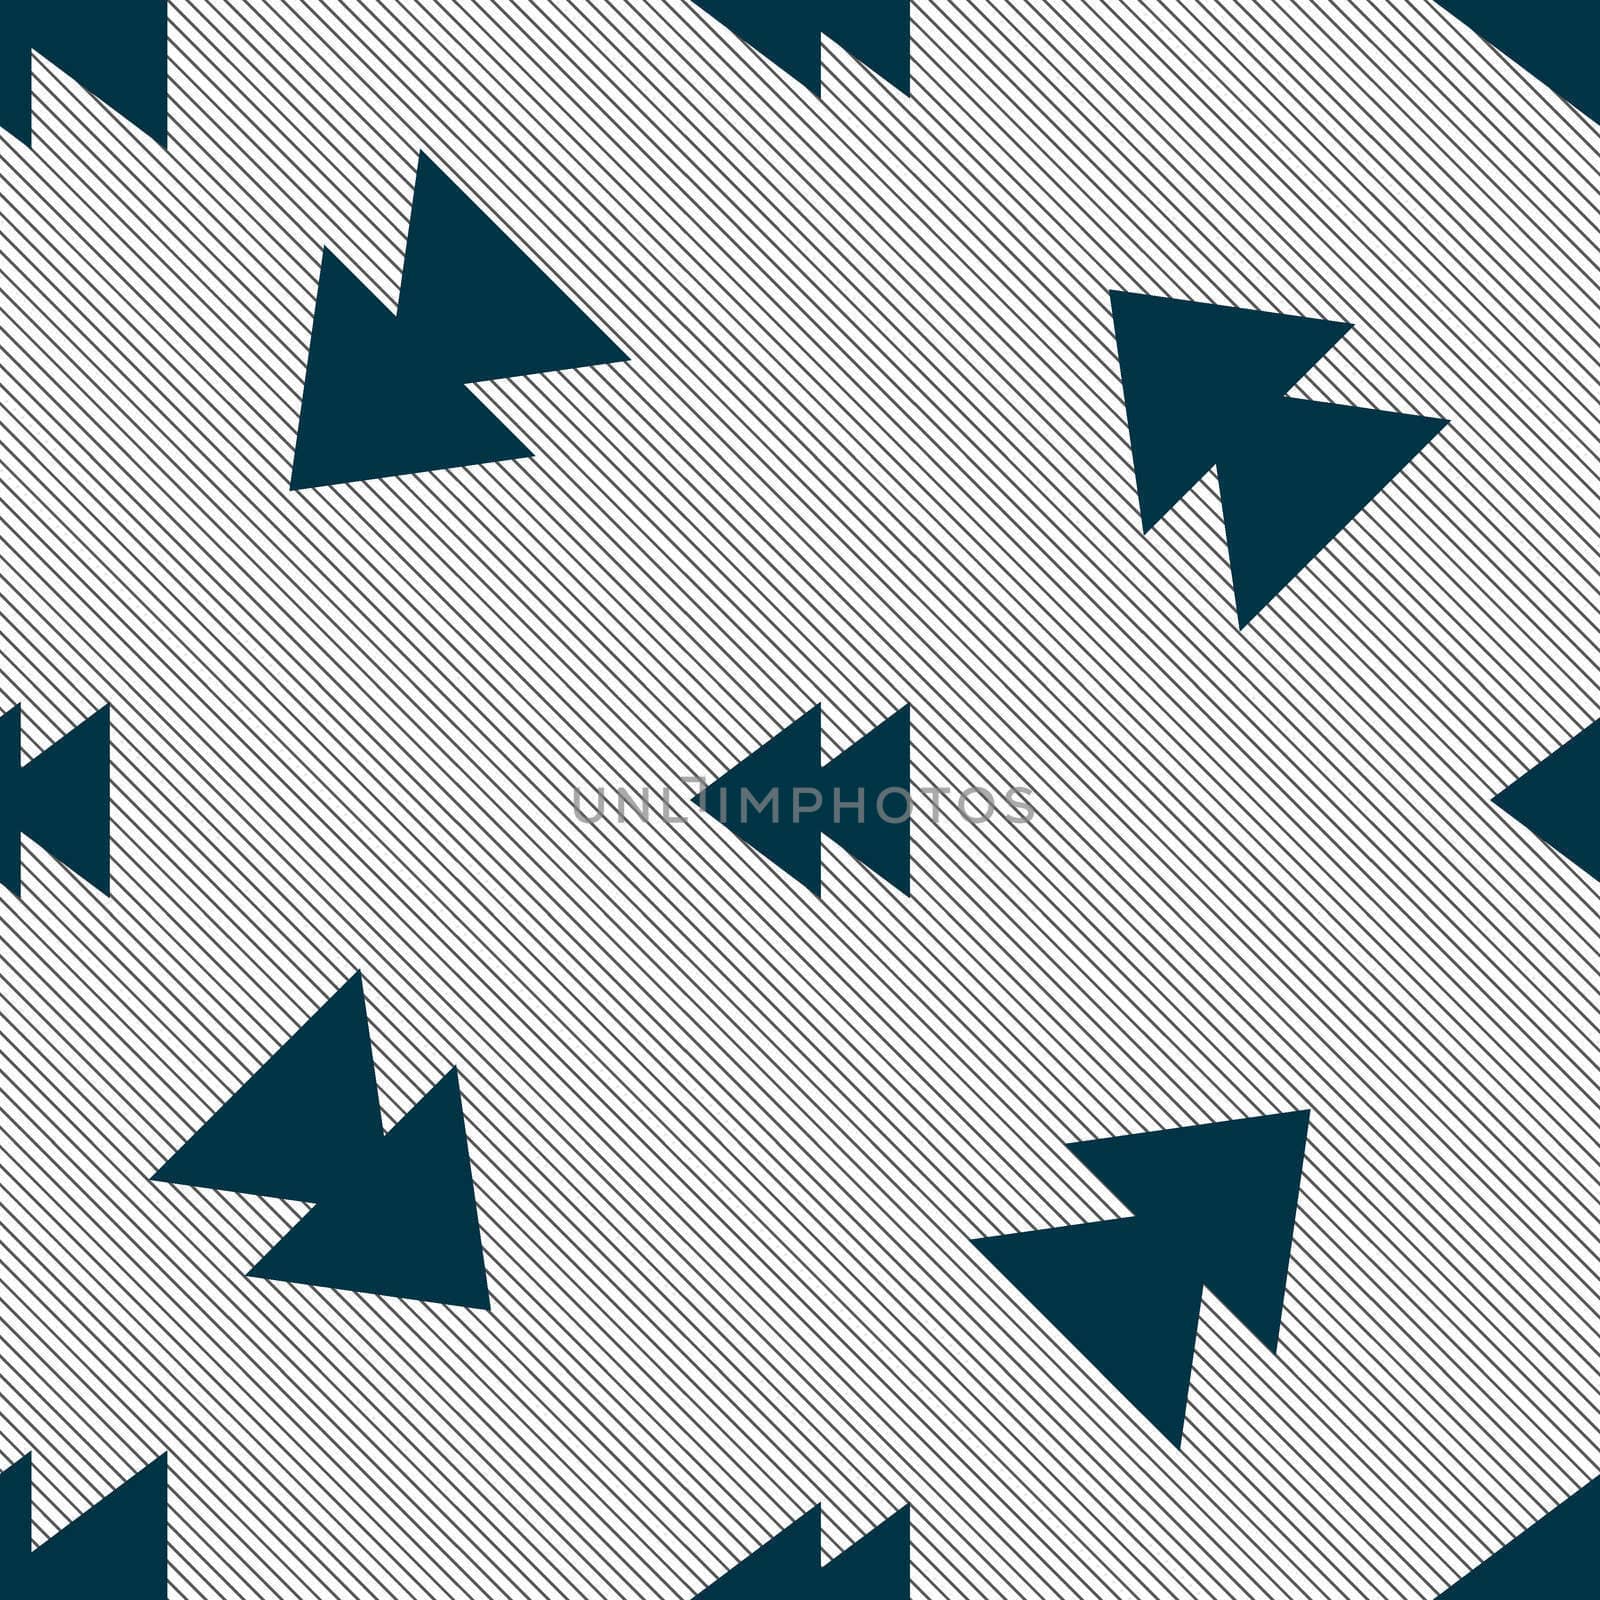 multimedia sign icon. Player navigation symbol. Seamless pattern with geometric texture. illustration